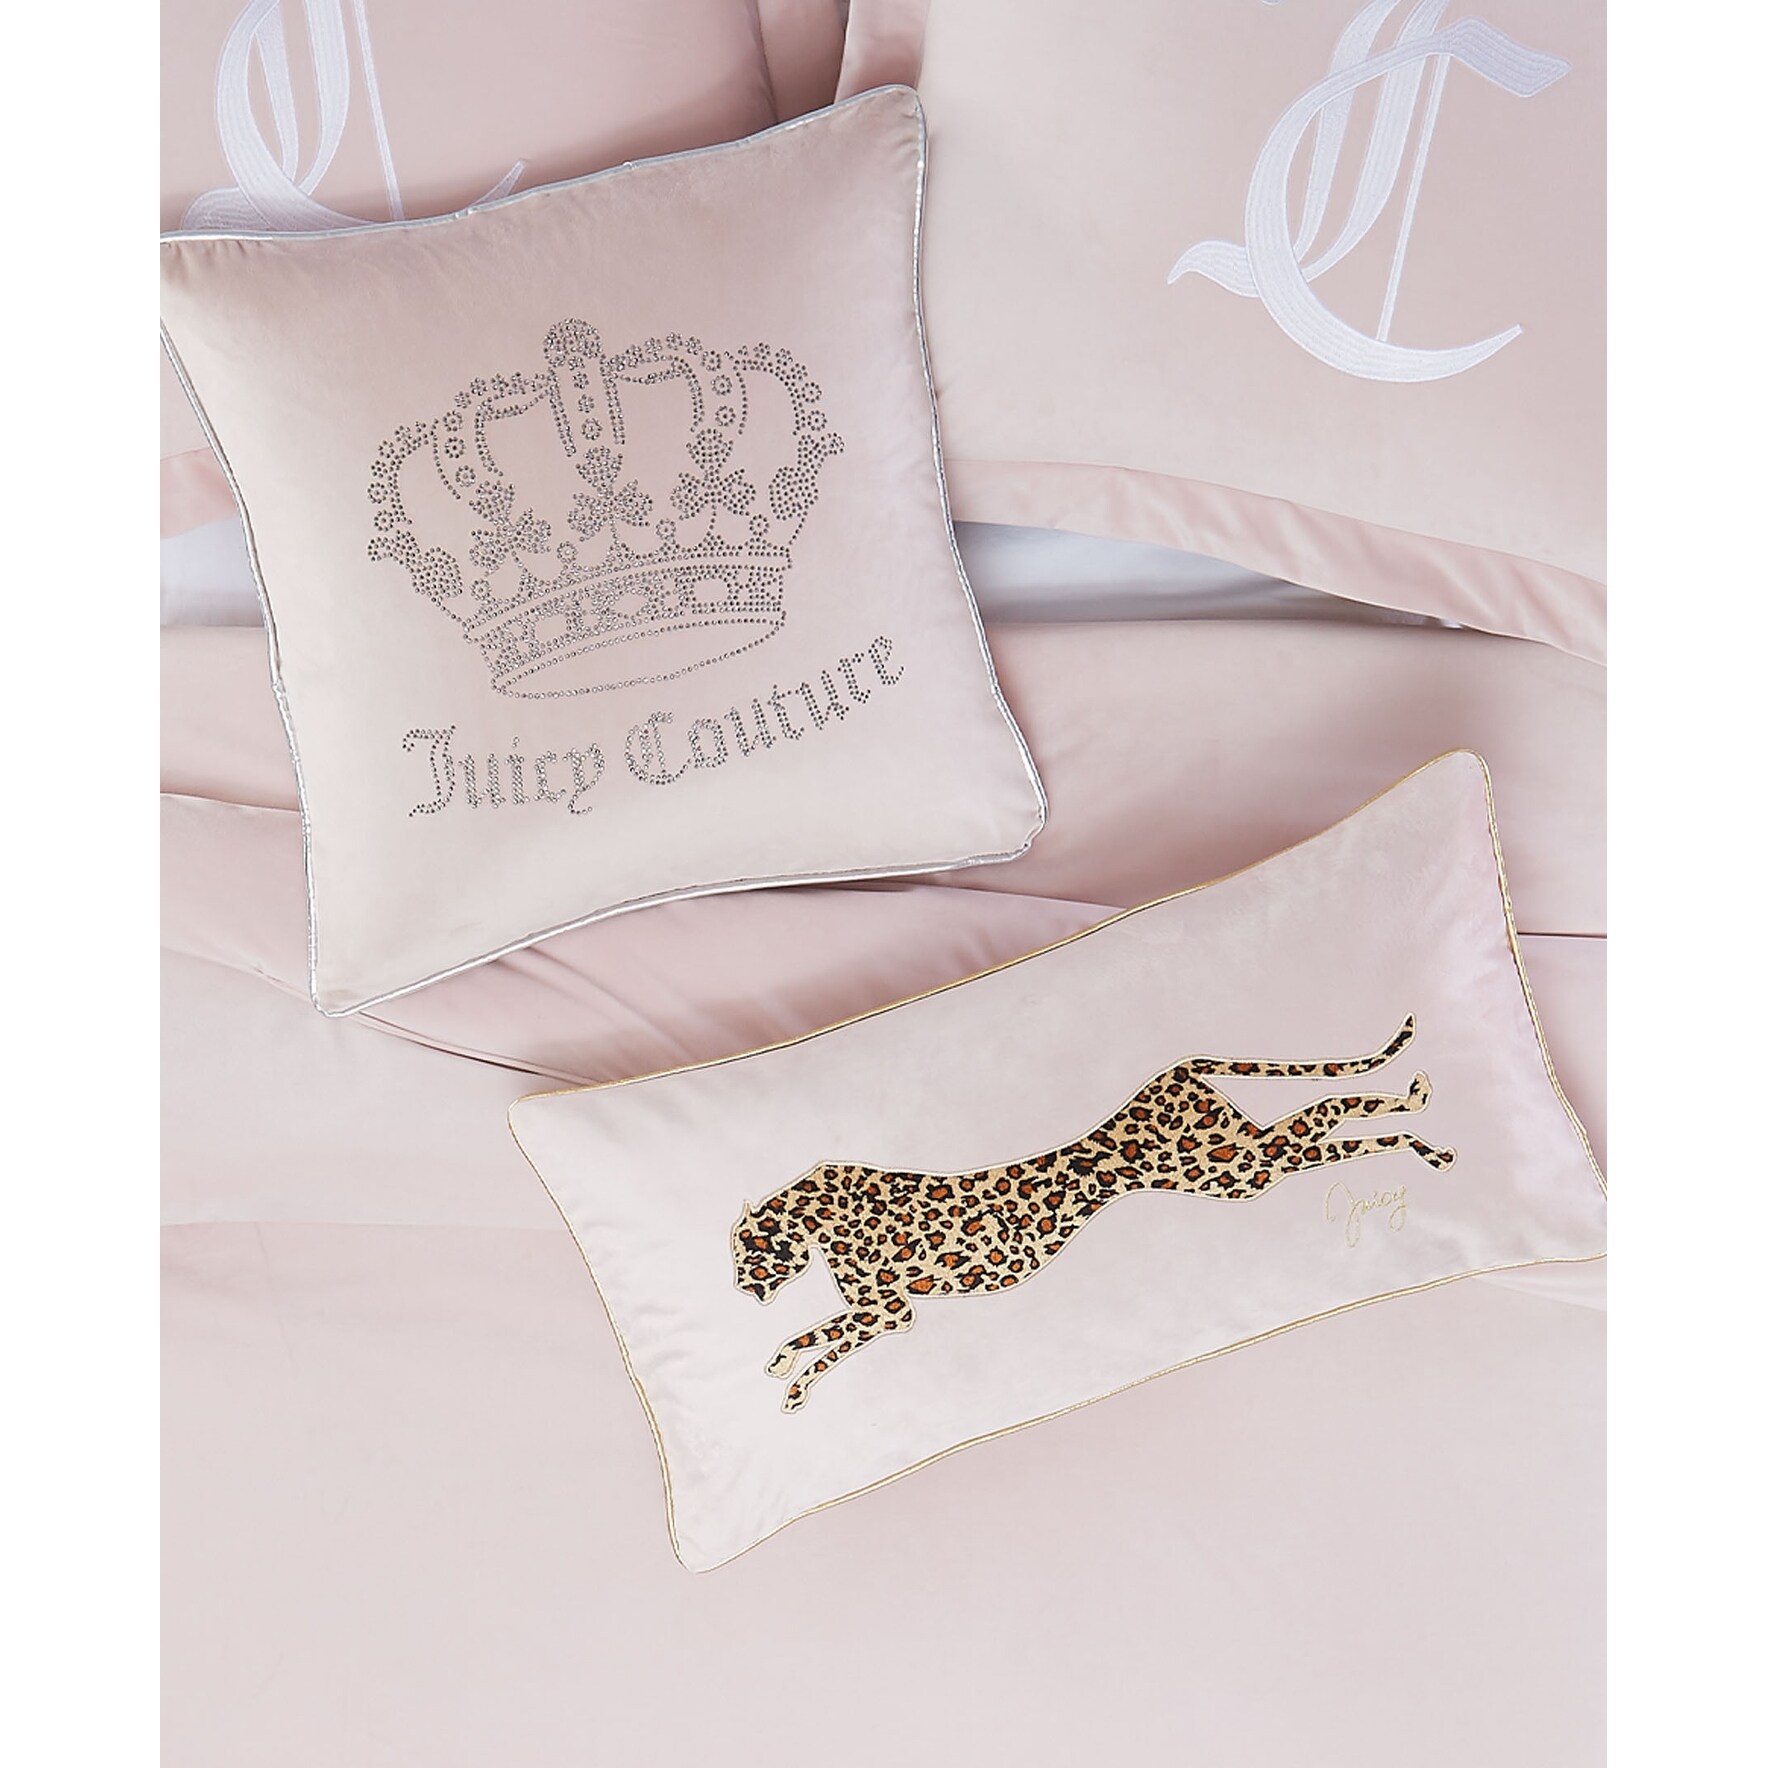 Juicy Couture Gothic Rhinestone Crown Pillow 20" x 20" - Pink